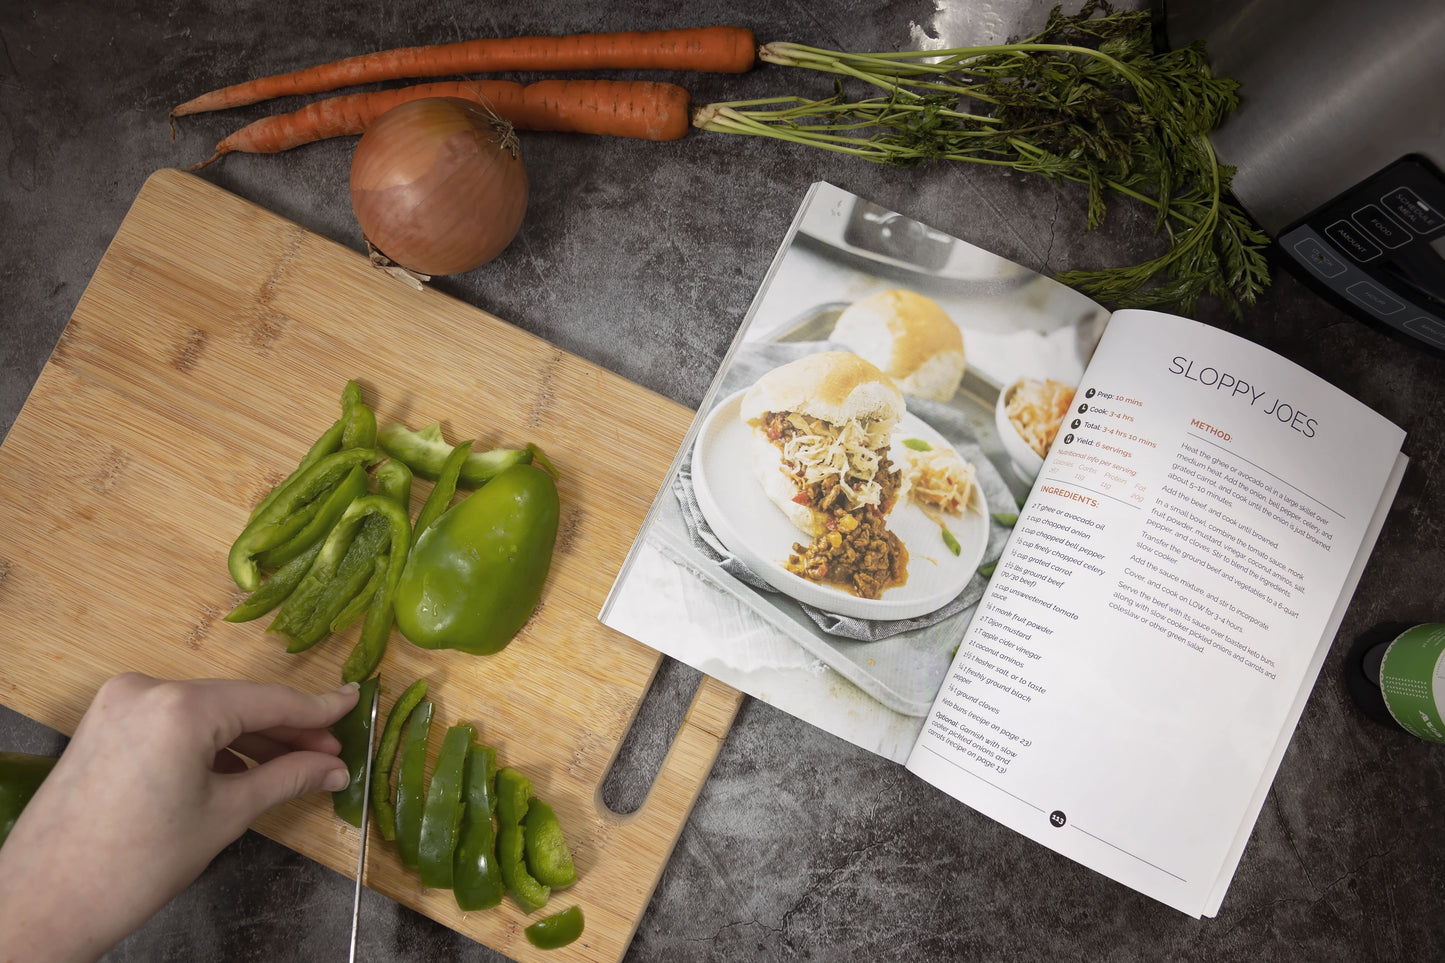 Vegetables are sliced on a wooden board placed on a plain grey surface with an opened Keto slow cookbook resting on it. Carrot and onion are visible.